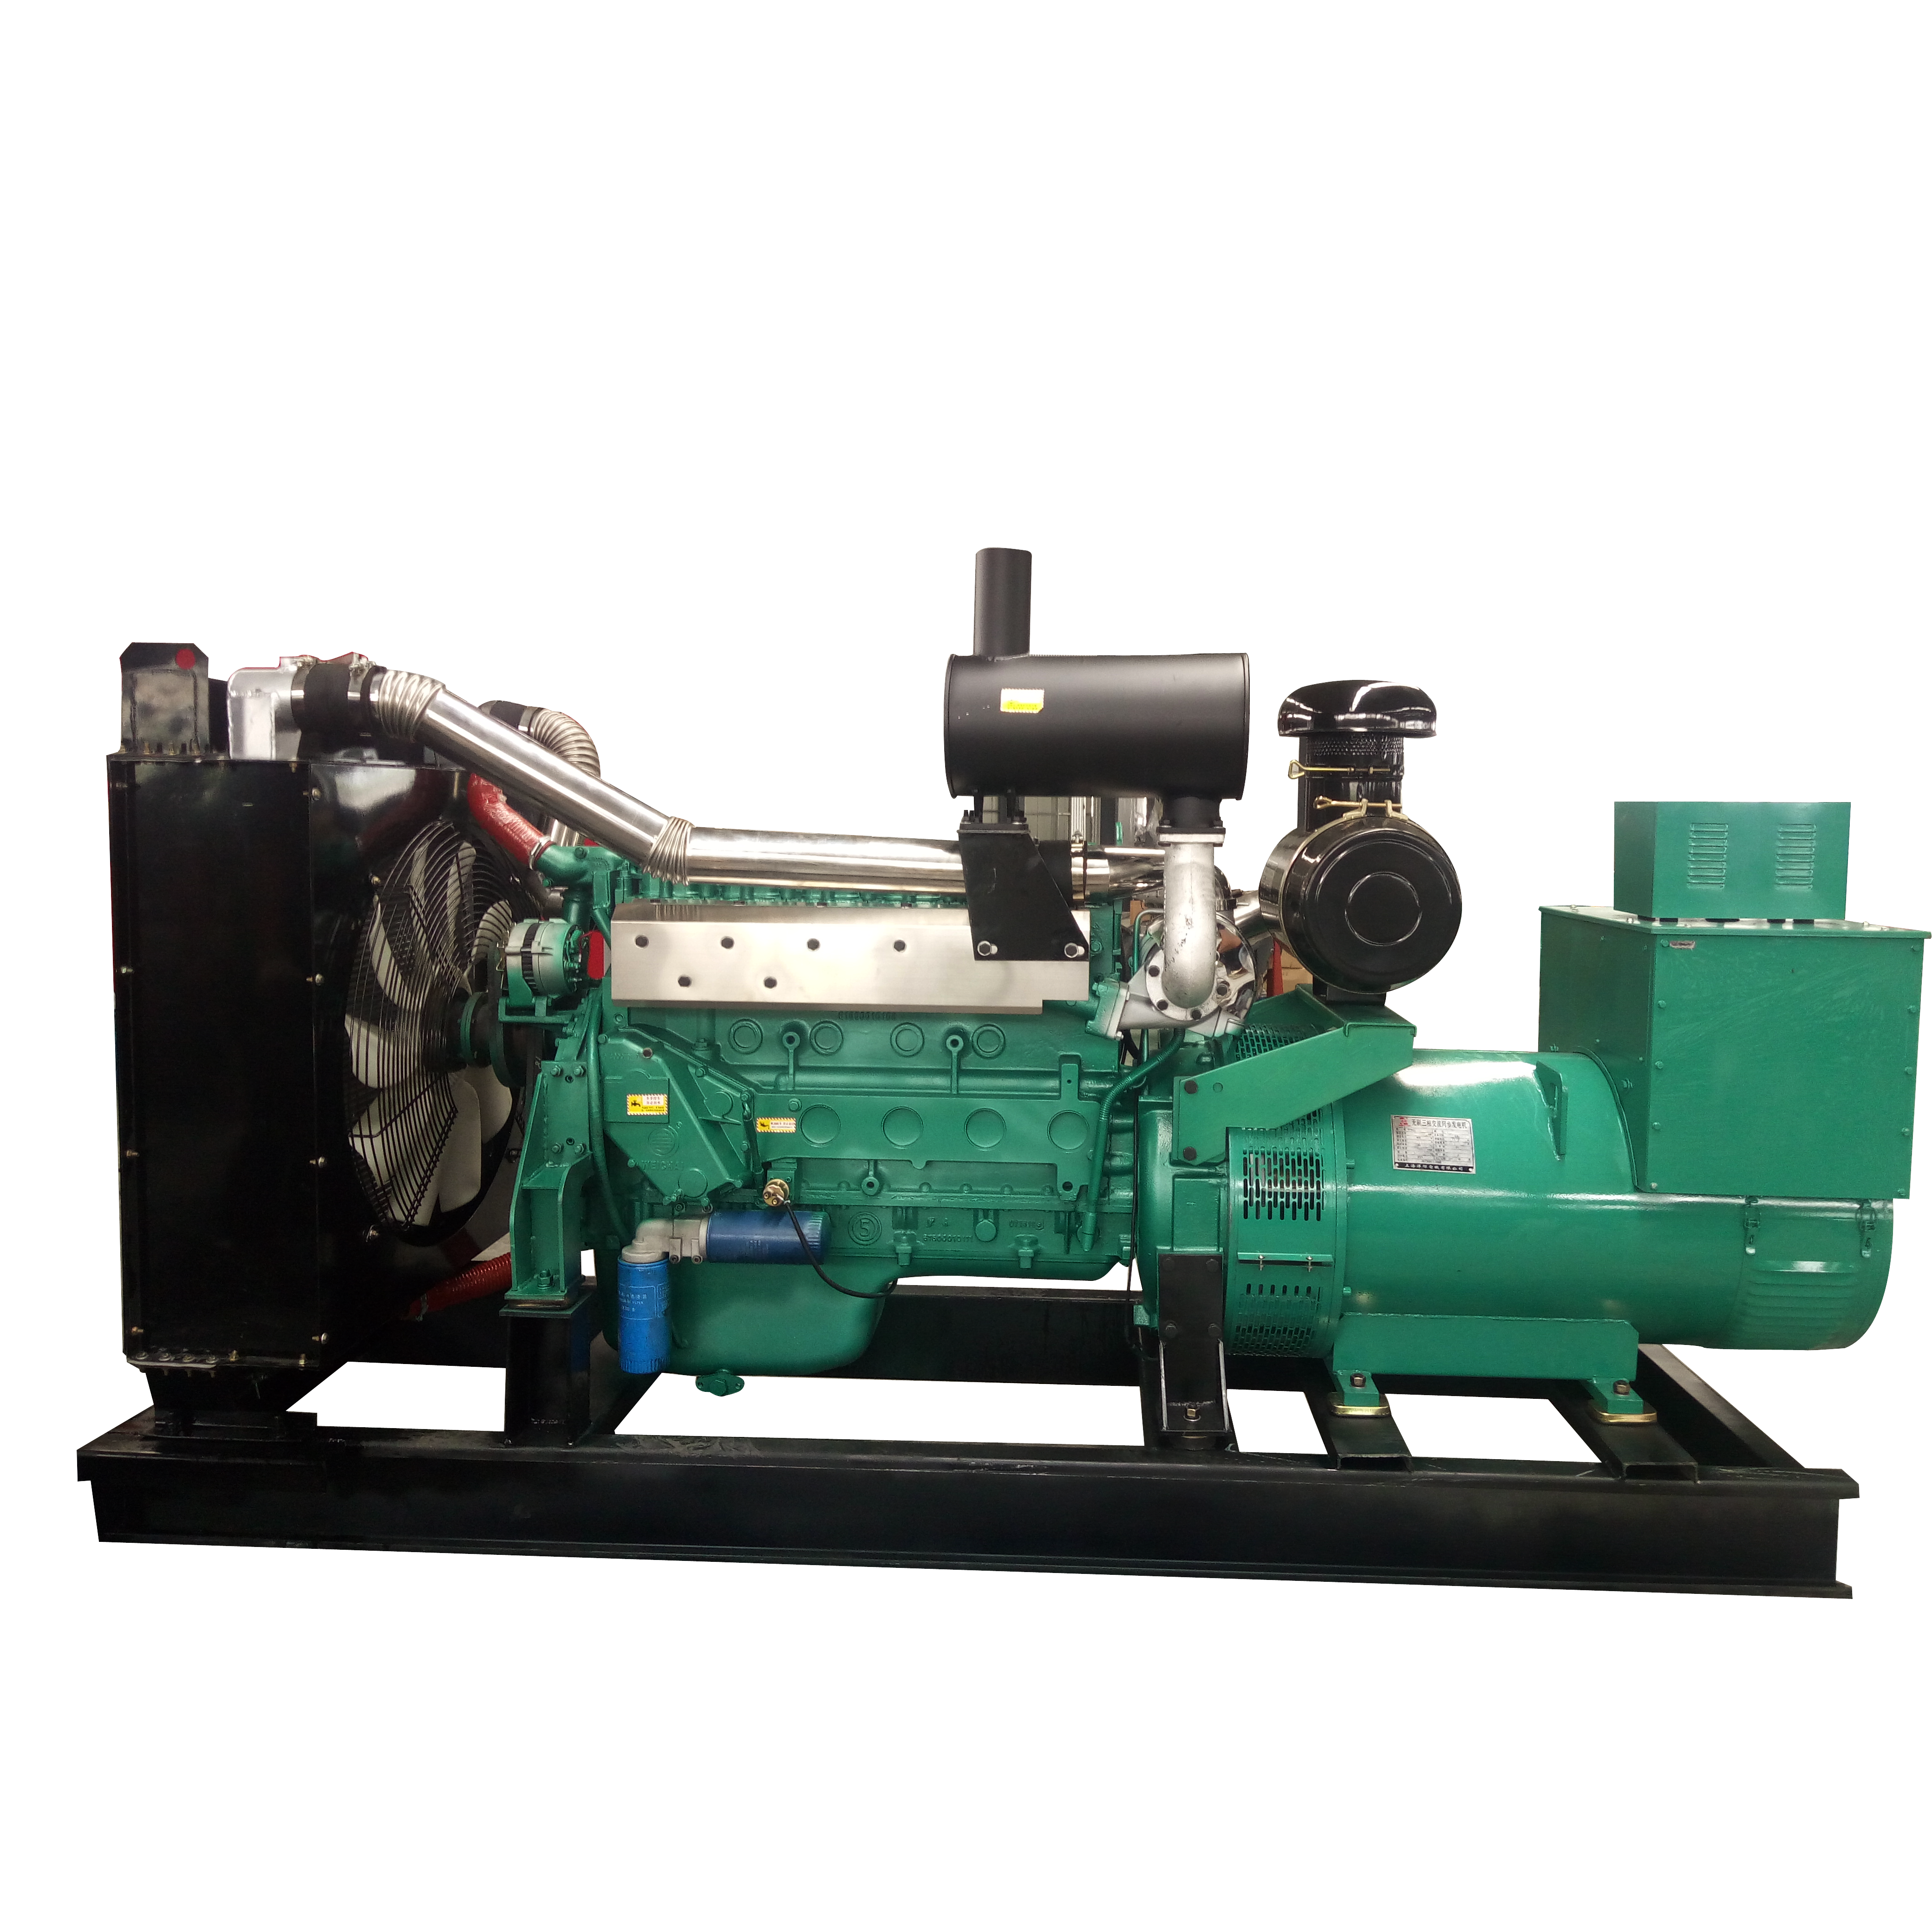 400kw diesel generator for industry use genset water cooling Featured Image